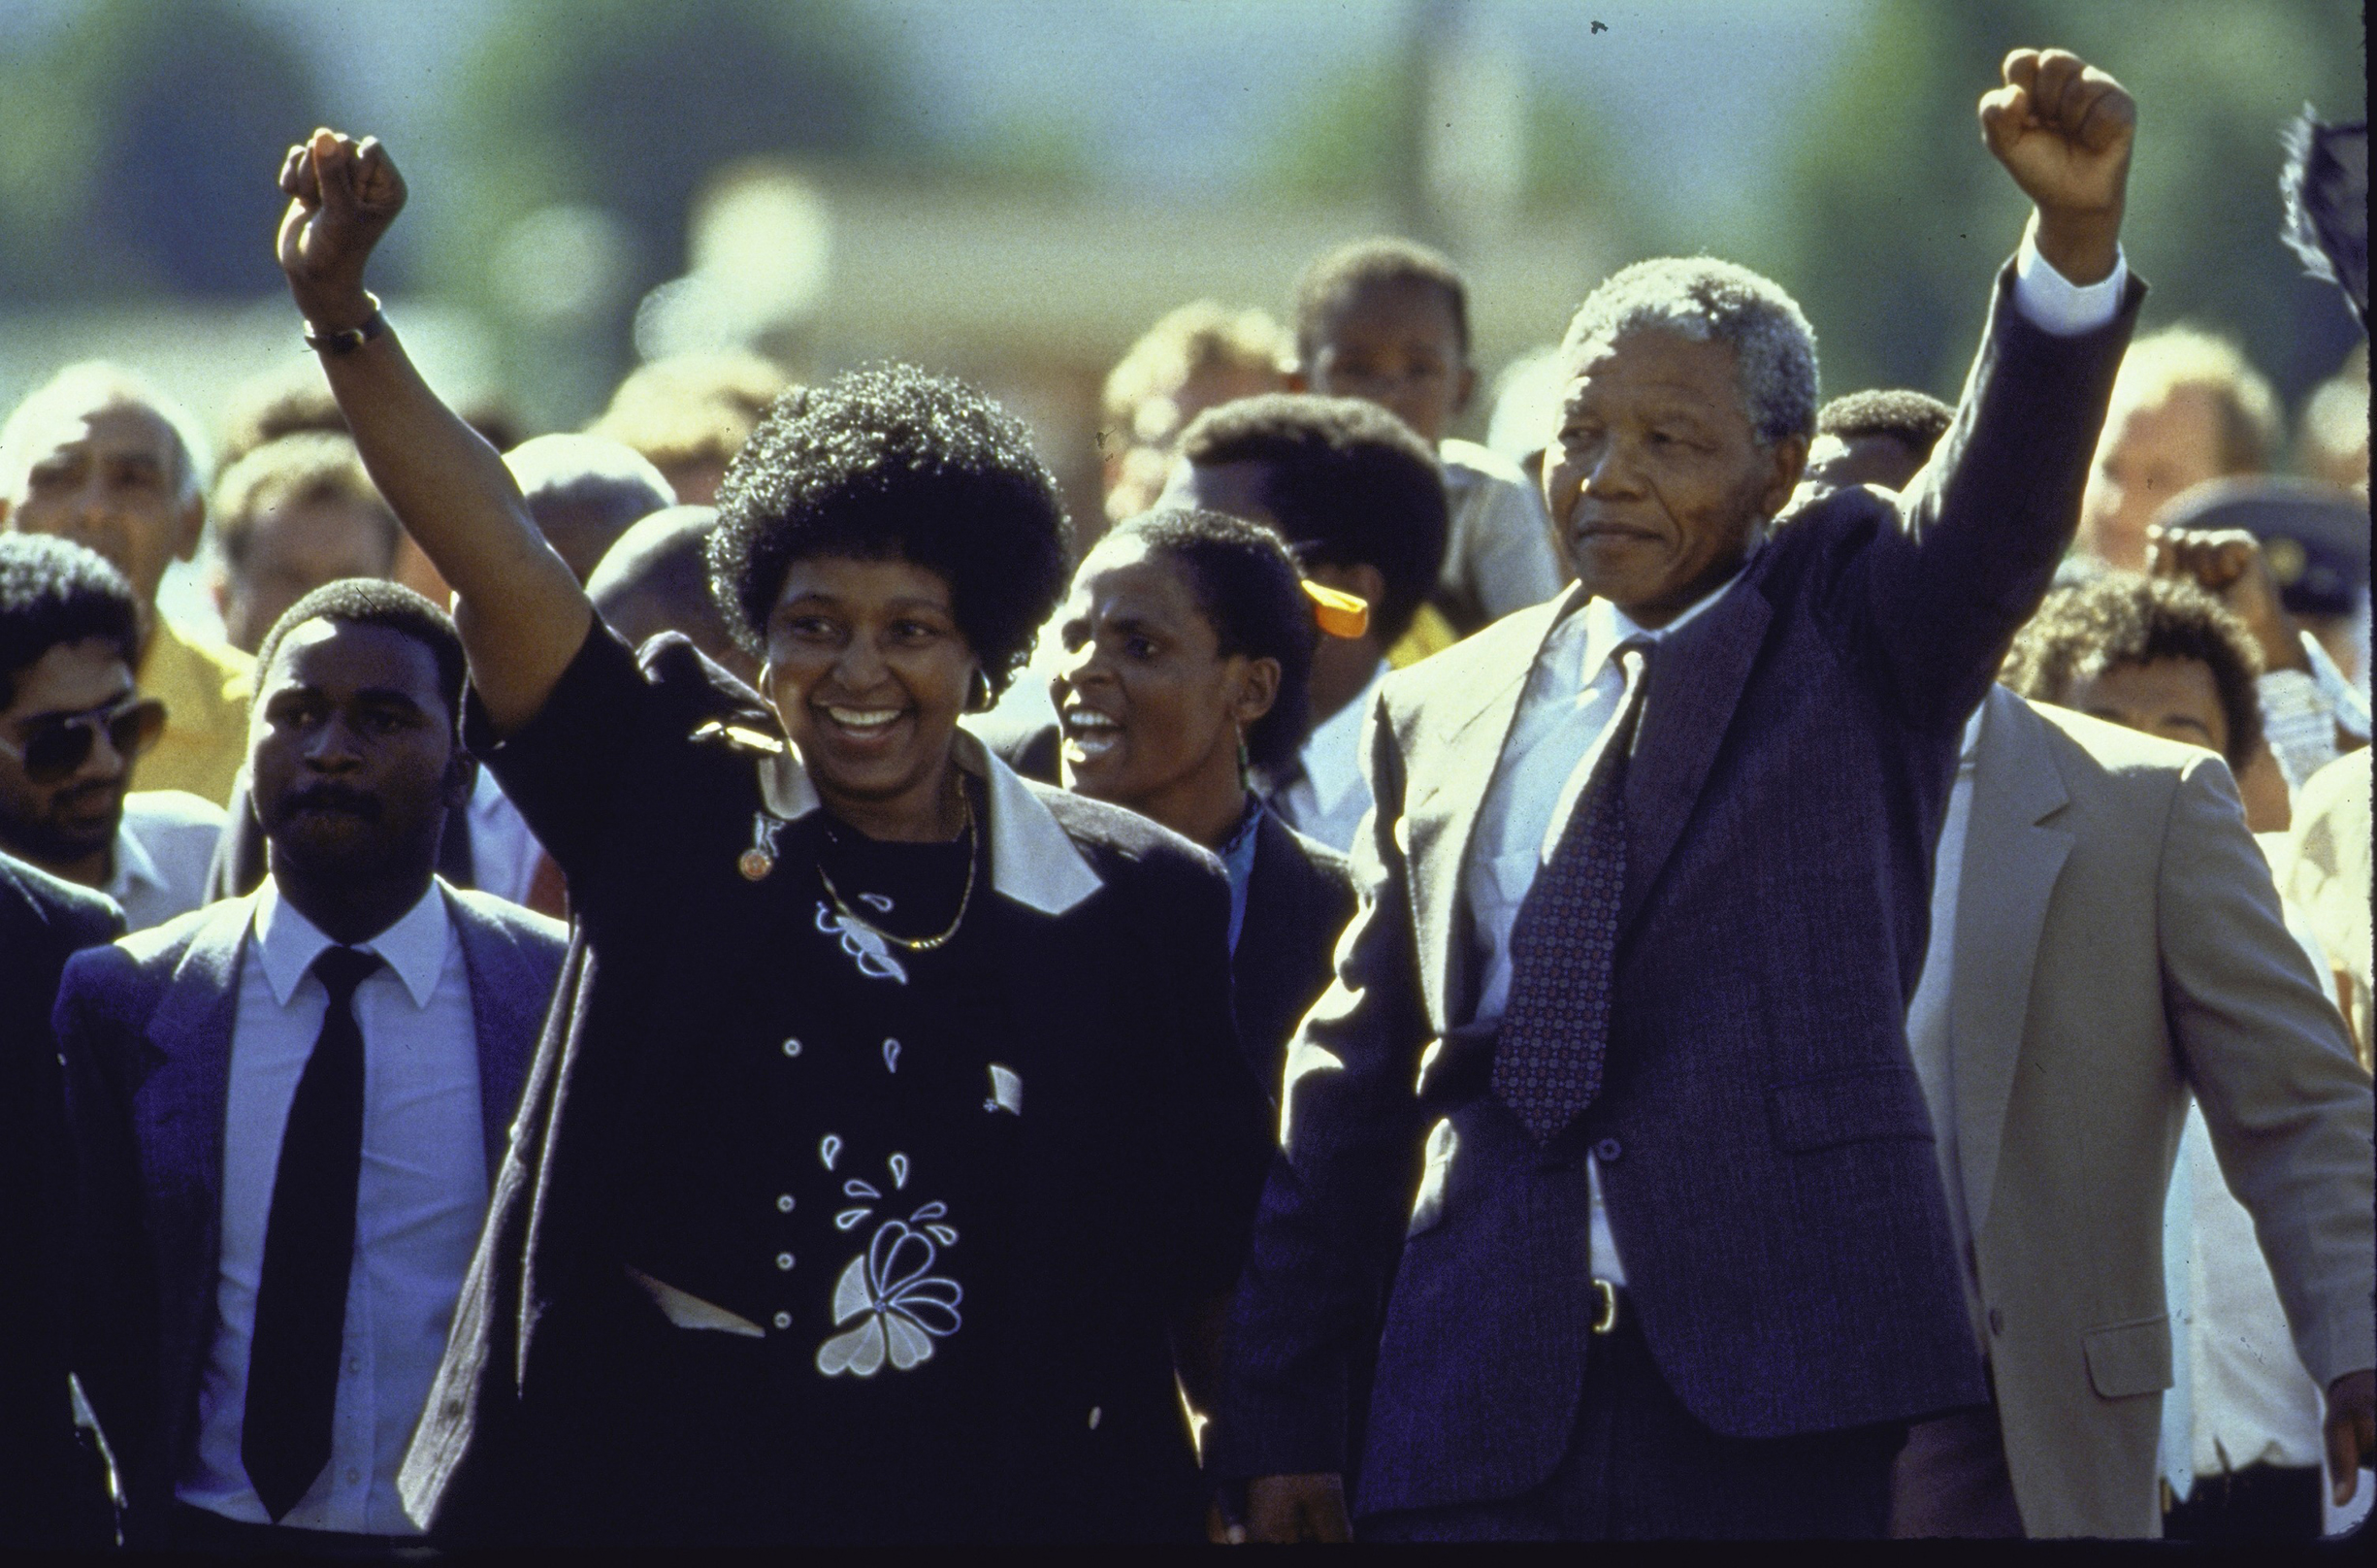 Madikizela-Mandela and her husband Nelson Mandela raise their fists in 1990 upon his release from prison after 27 years (Allan Tannenbaum—The LIFE Images Collection/Getty Images)